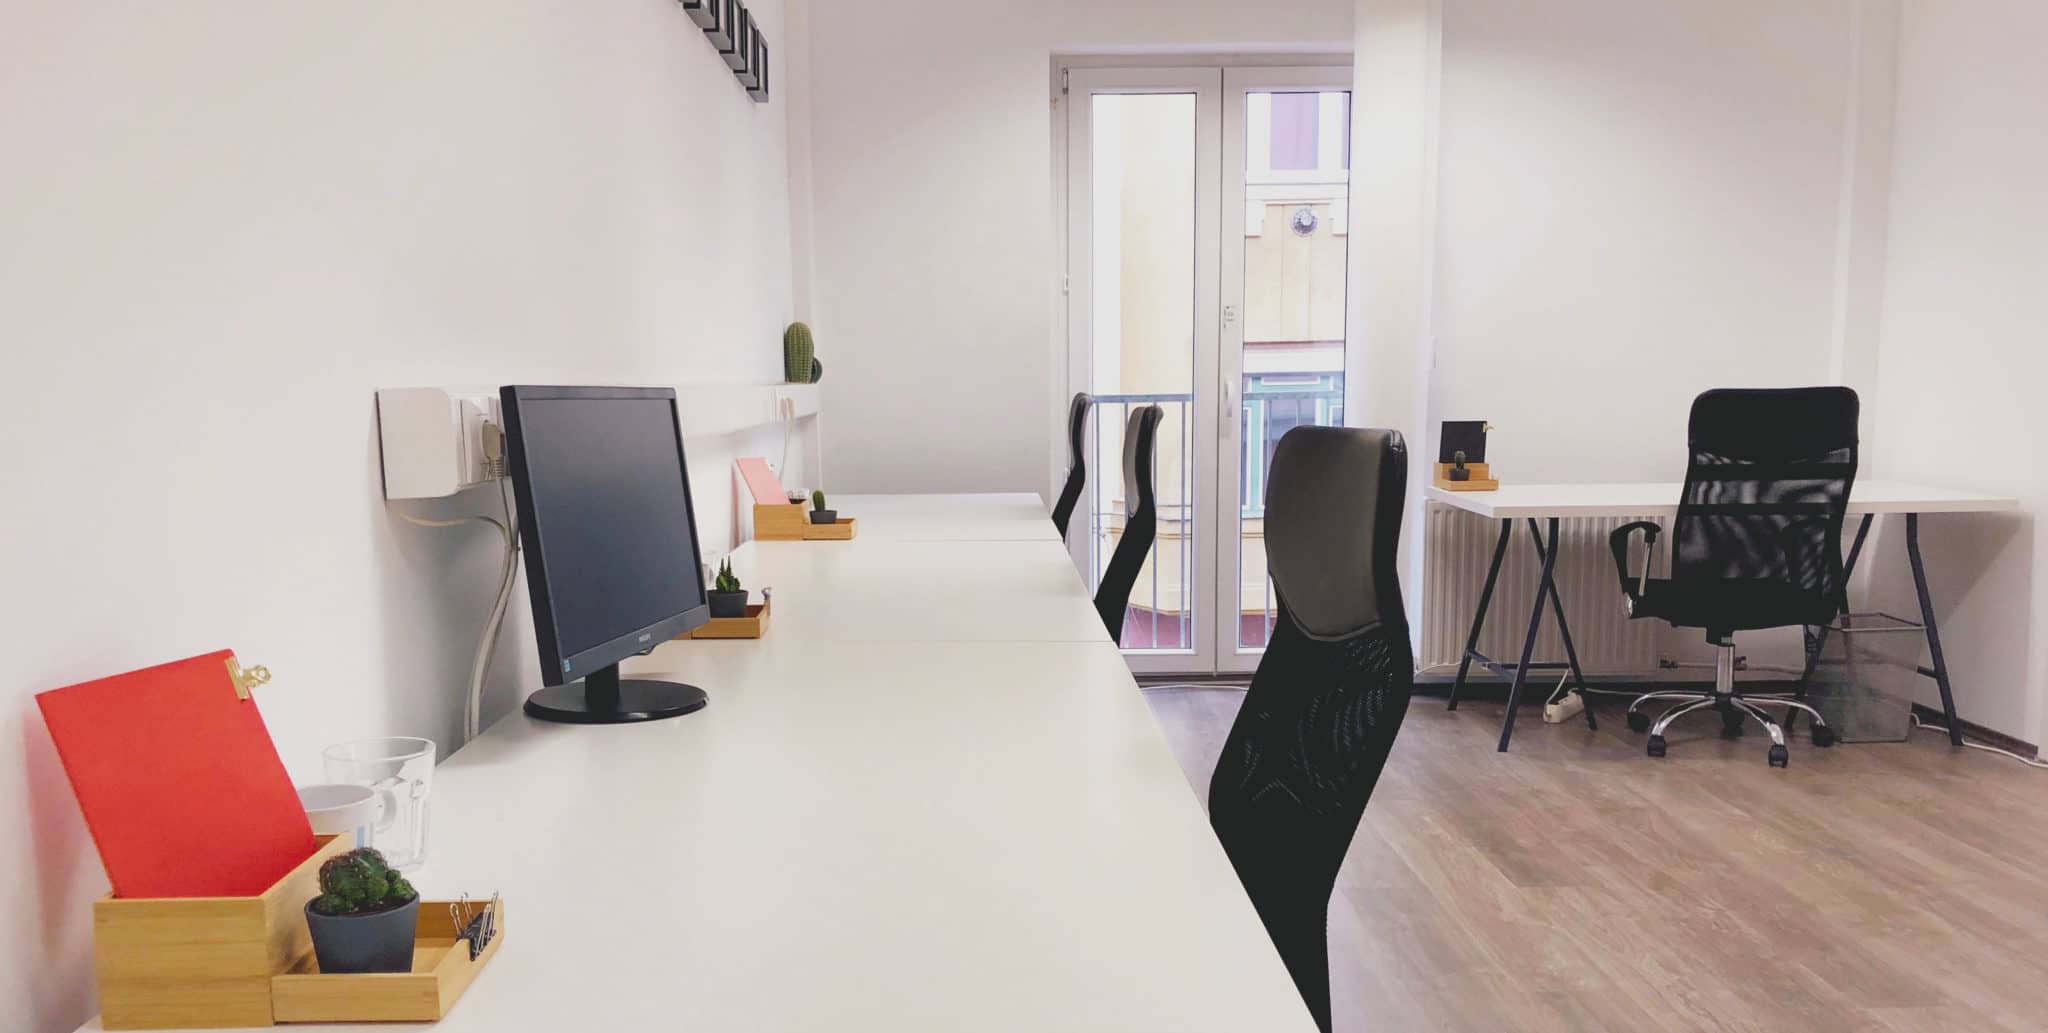 Canva black office rolling chair beside white wooden table.